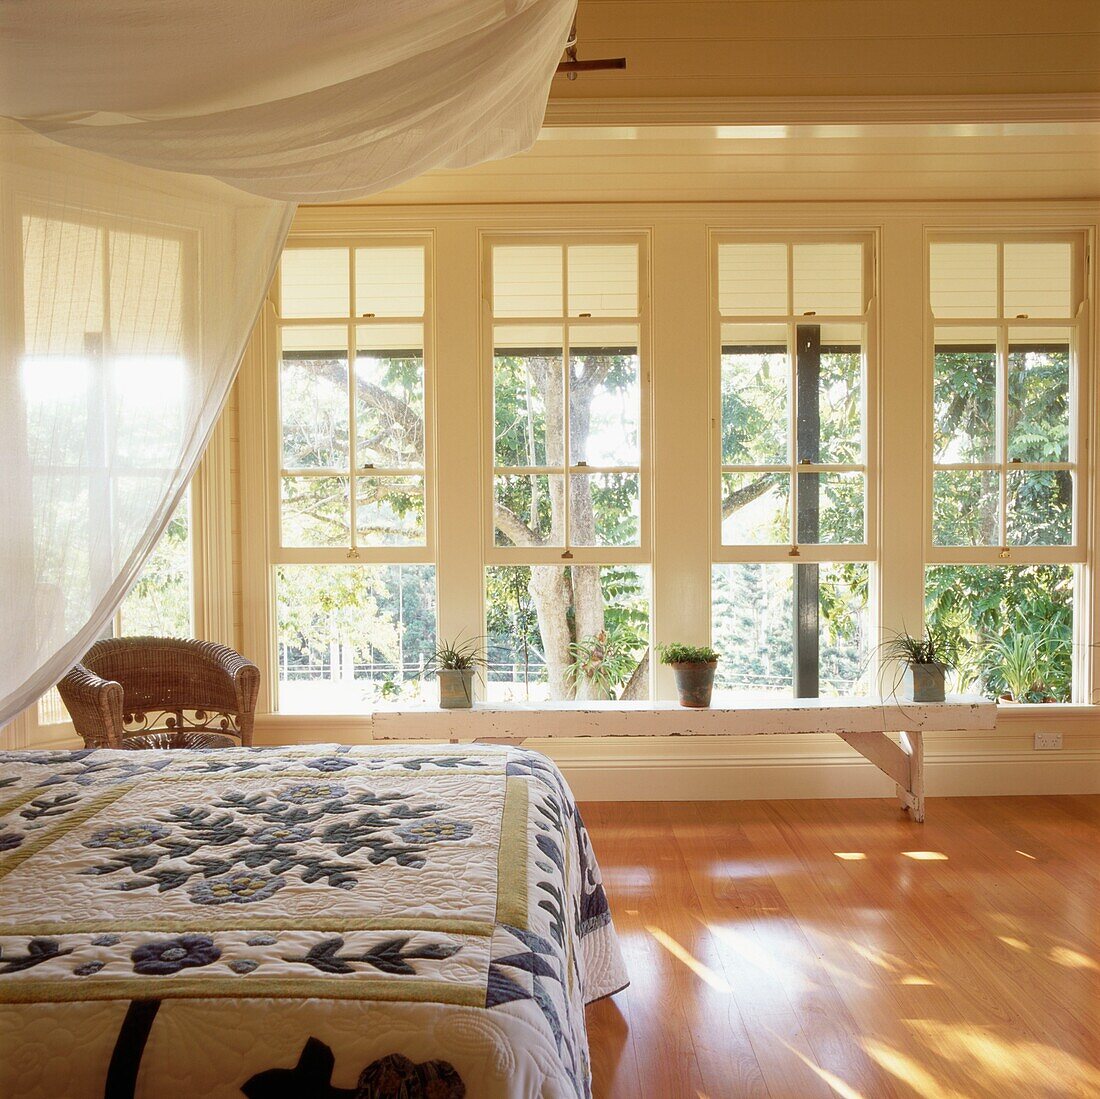 Master bedroom with wood floor and large windows double bed with patchwork quilt